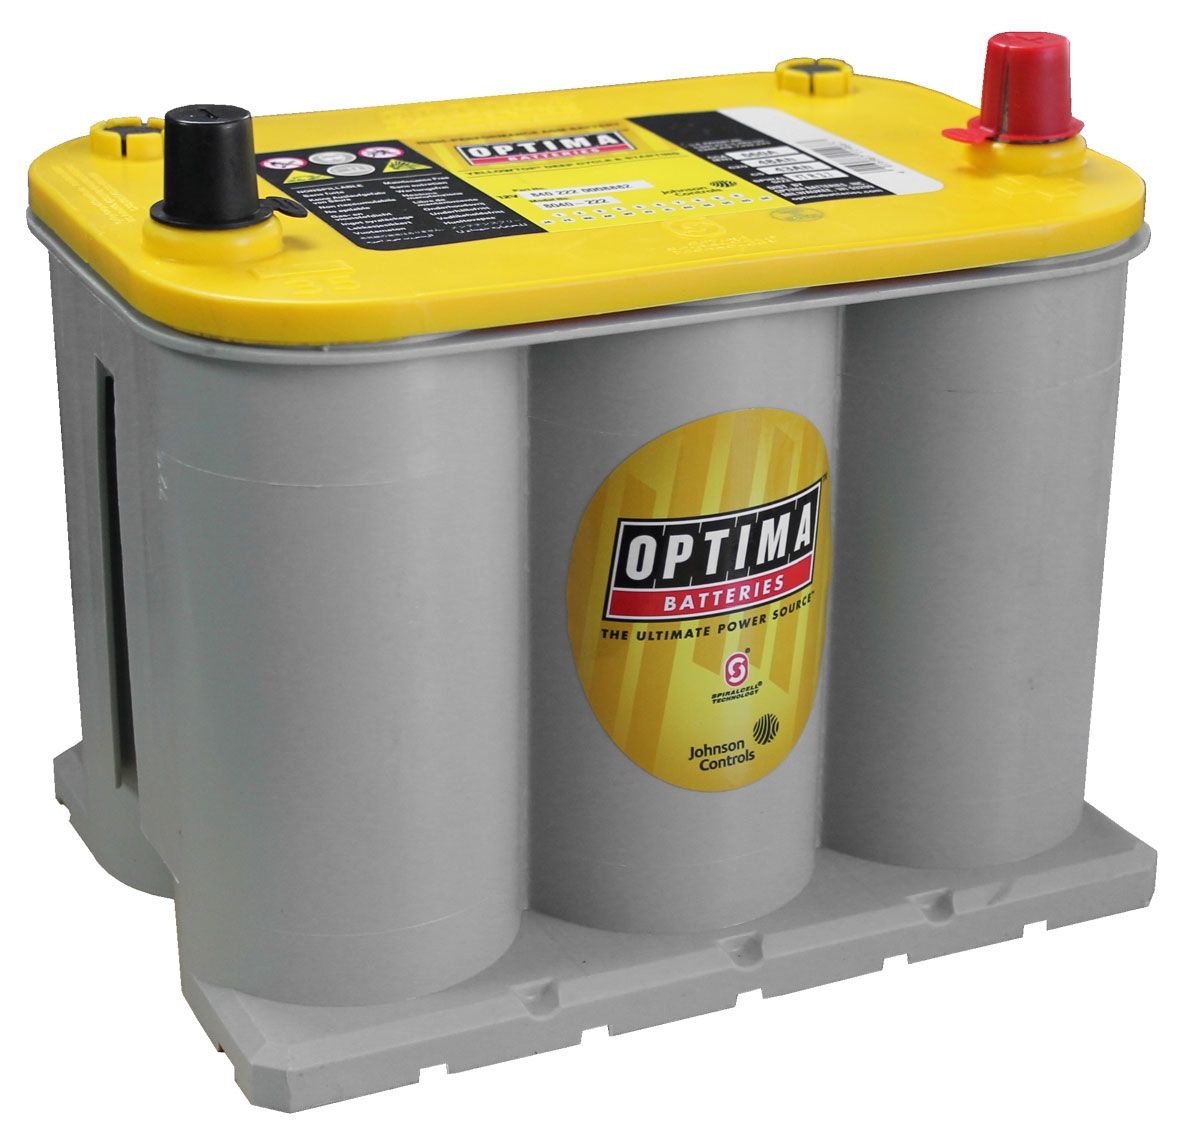 Best Car Battery Charger - optimabatteries